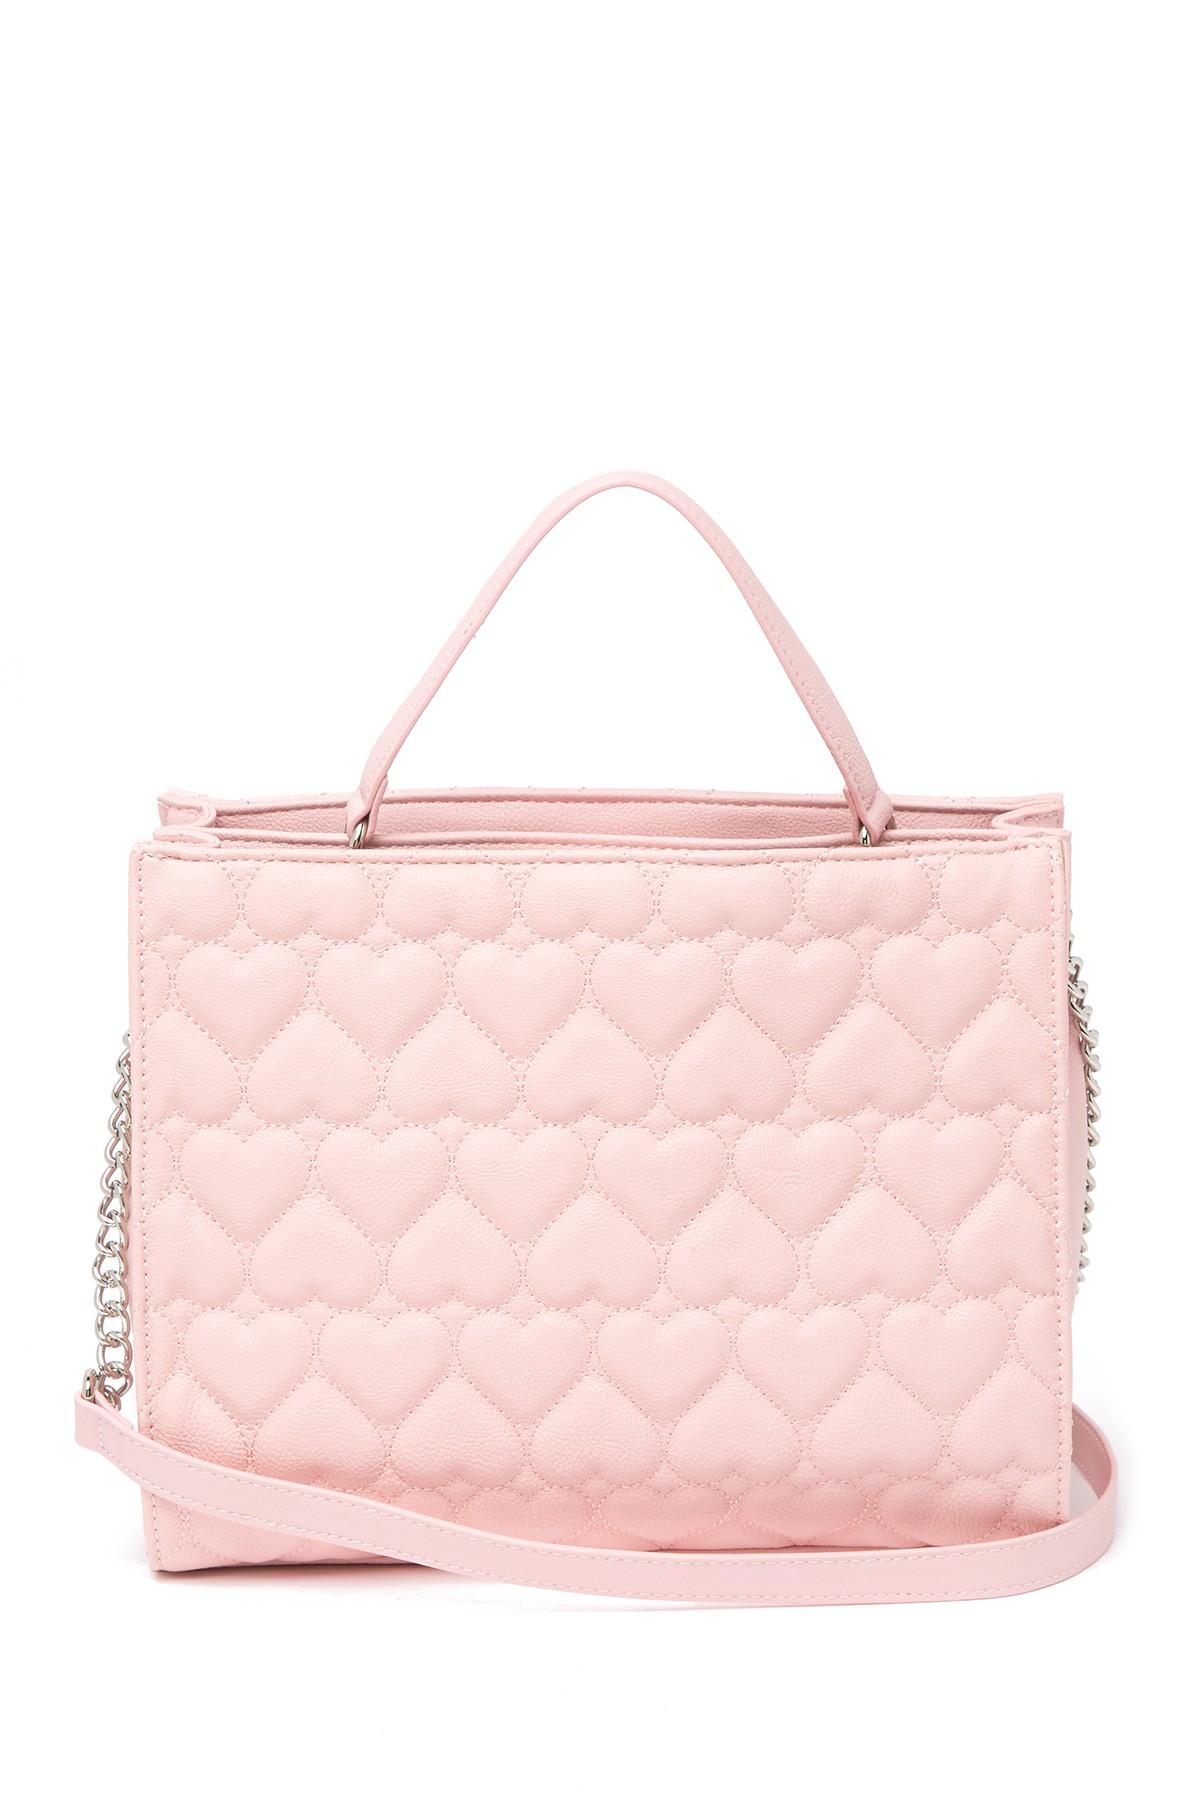 Betsey Johnson Quilted Heart Satchel in Blush (Pink) - Lyst